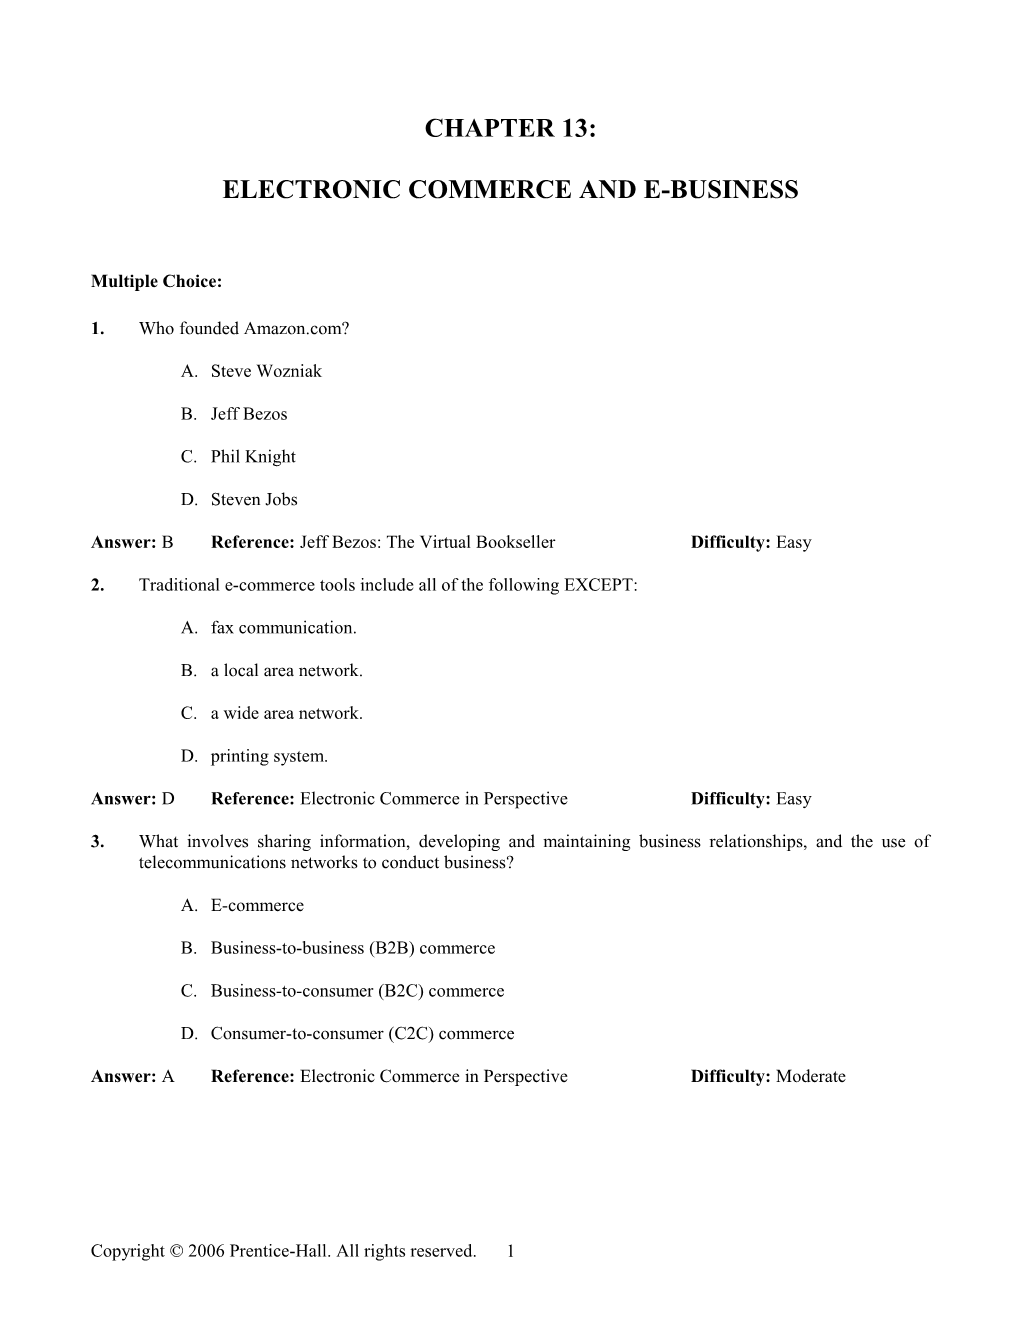 Chapter 13: Electronic Commerce and E-Business